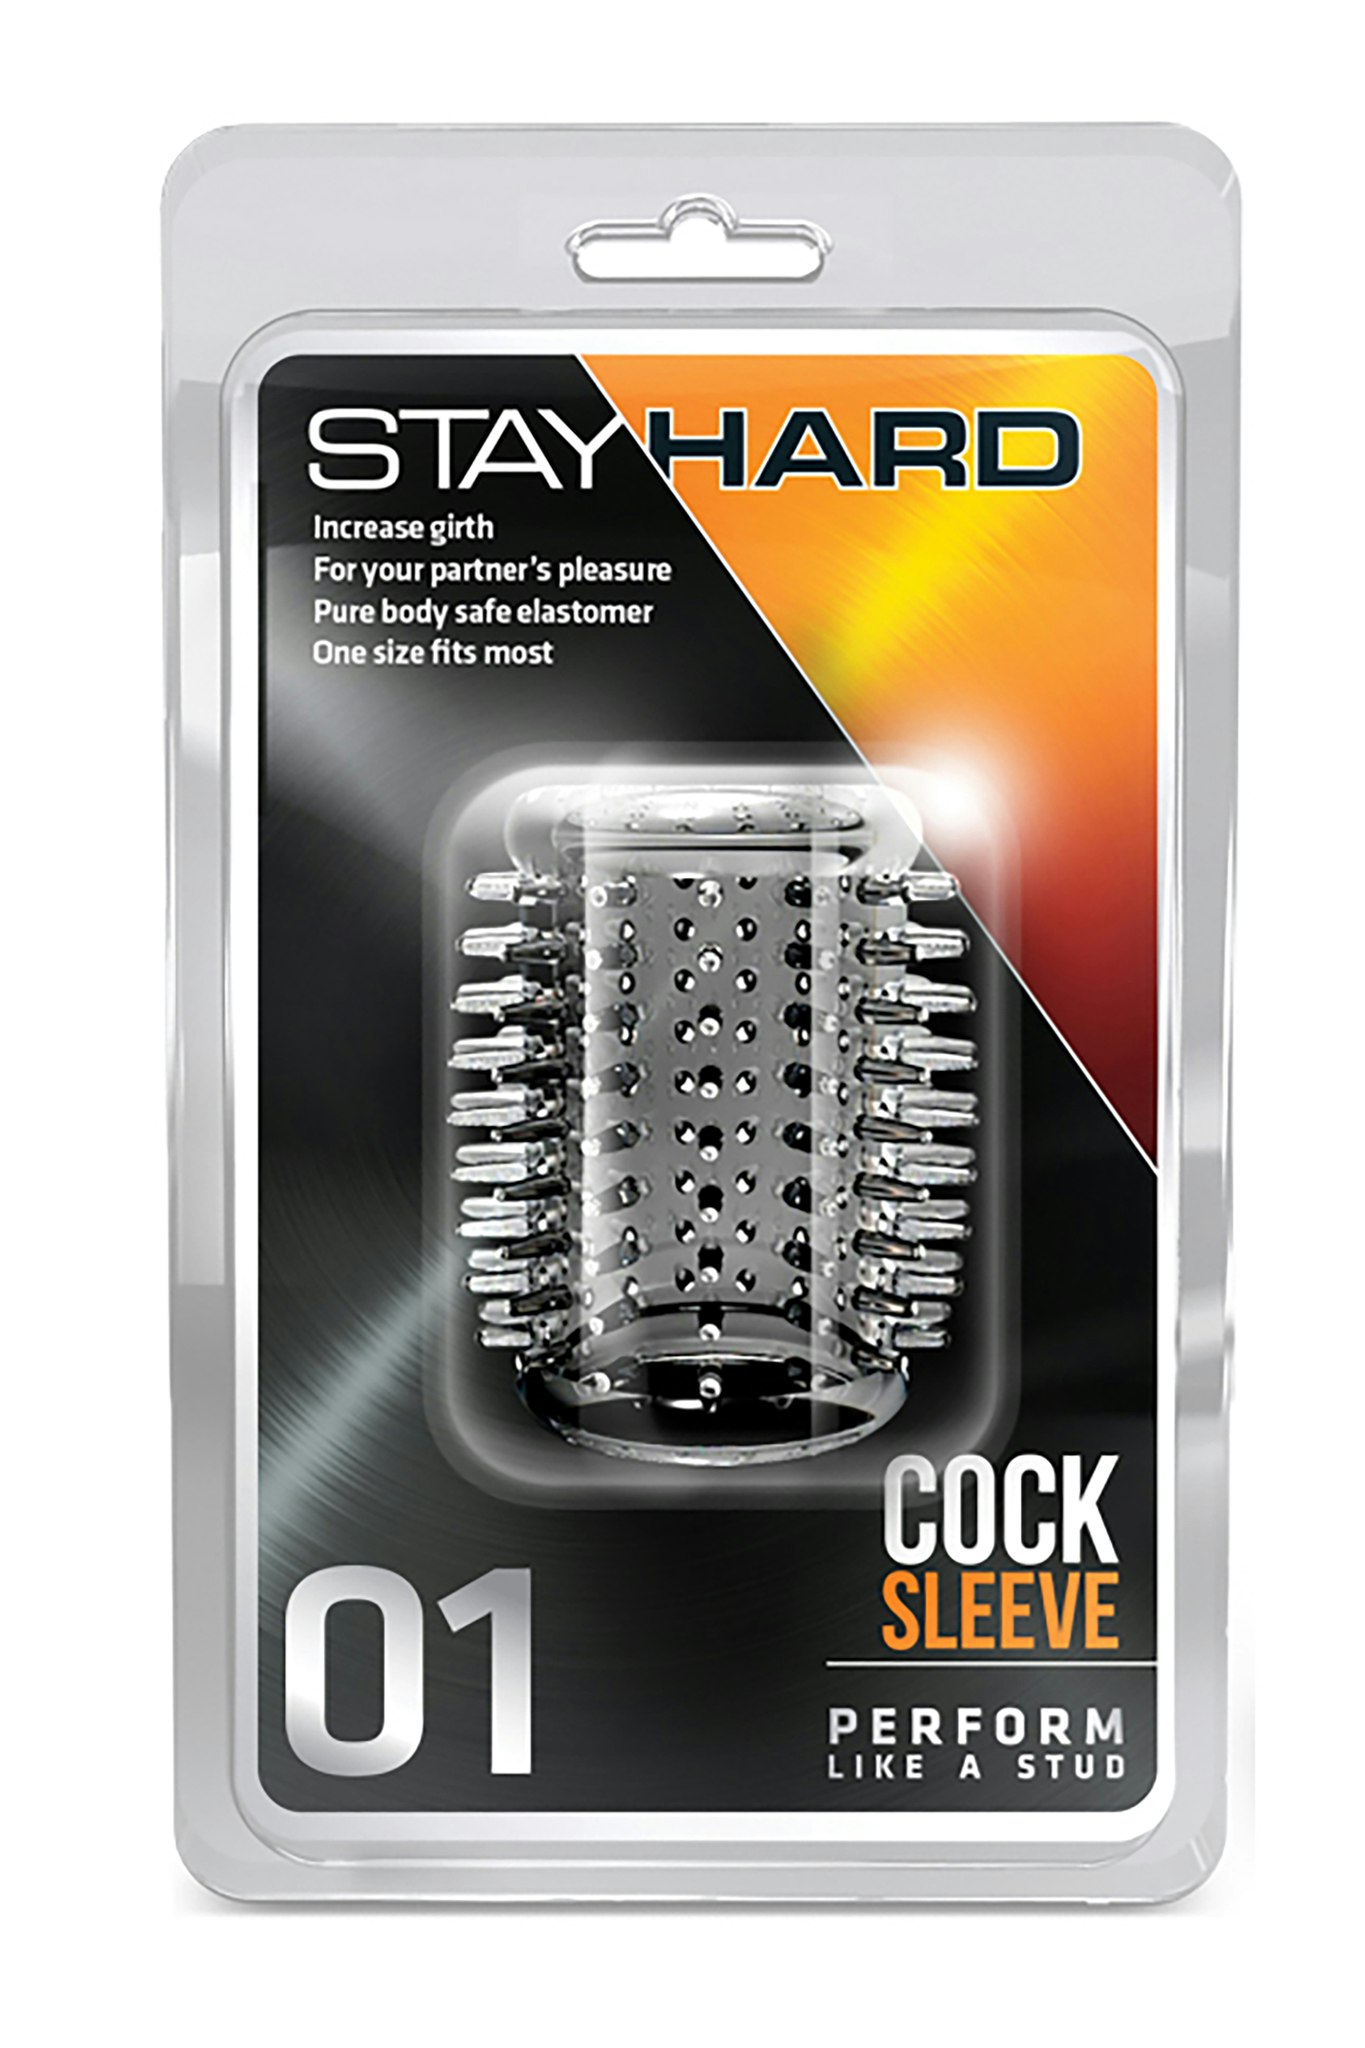 Stay hard cock sleeve 01, clear